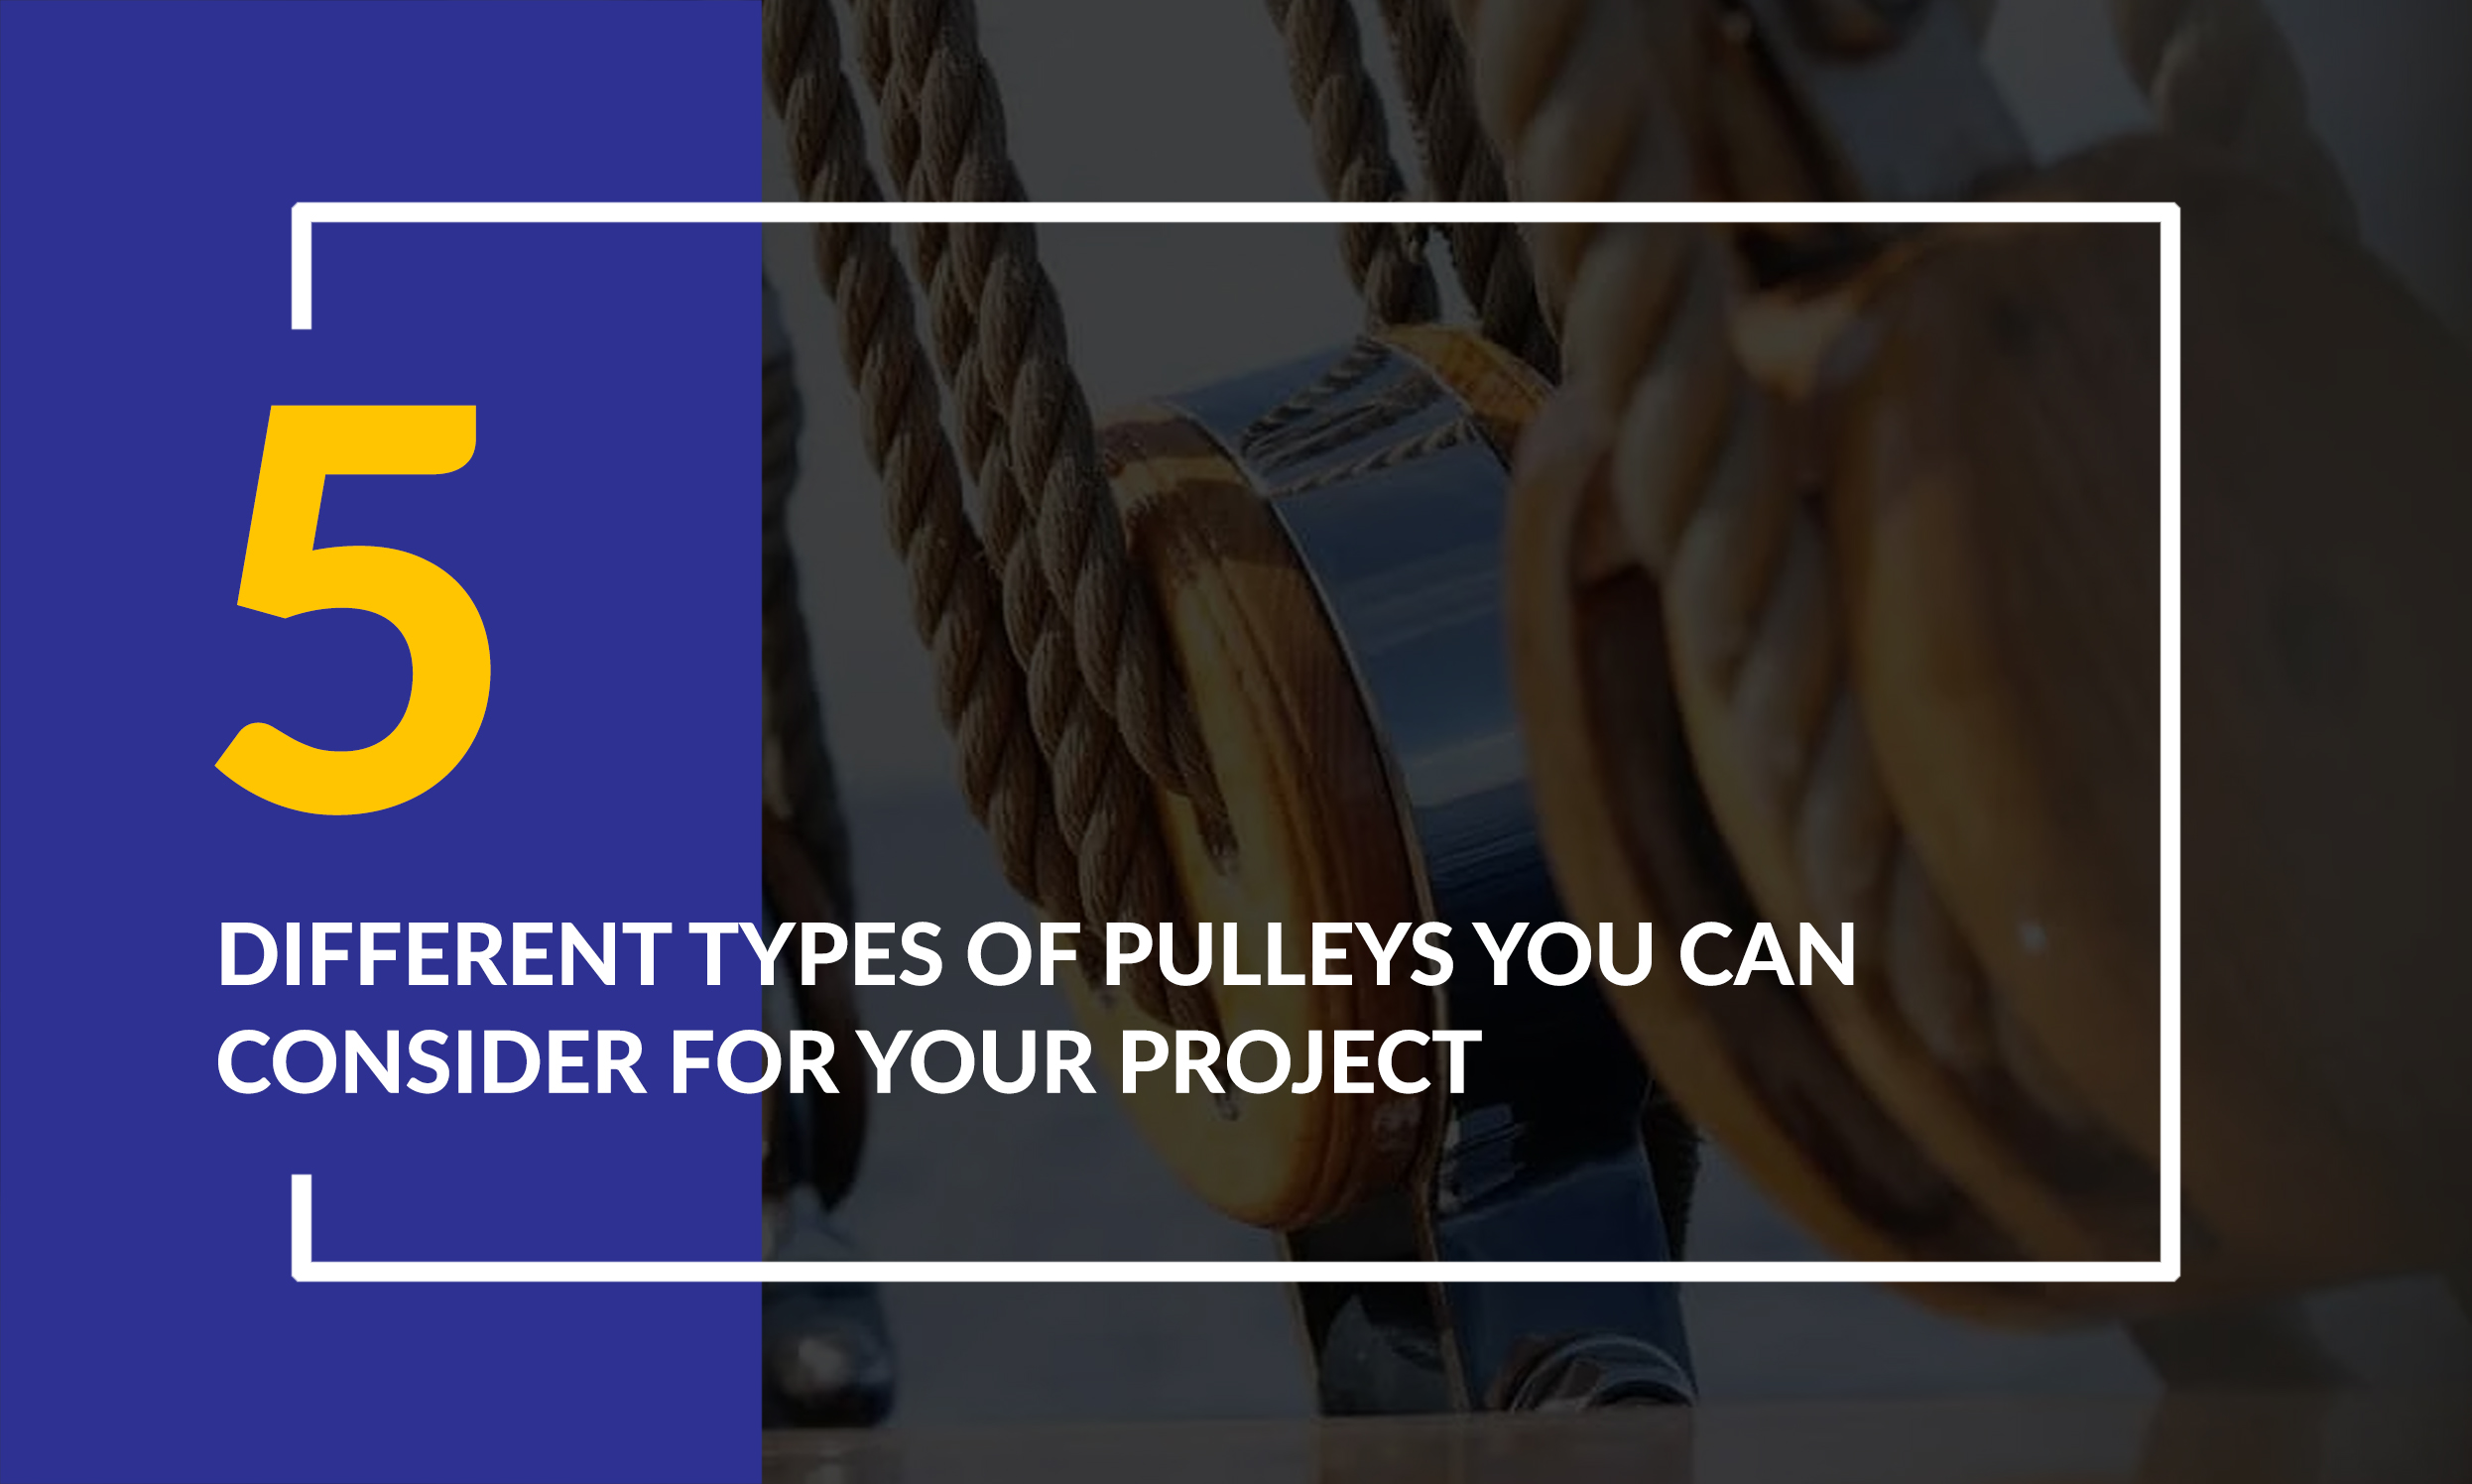 Here Are 5 Different Types of Pulleys You Can Consider For Your Project